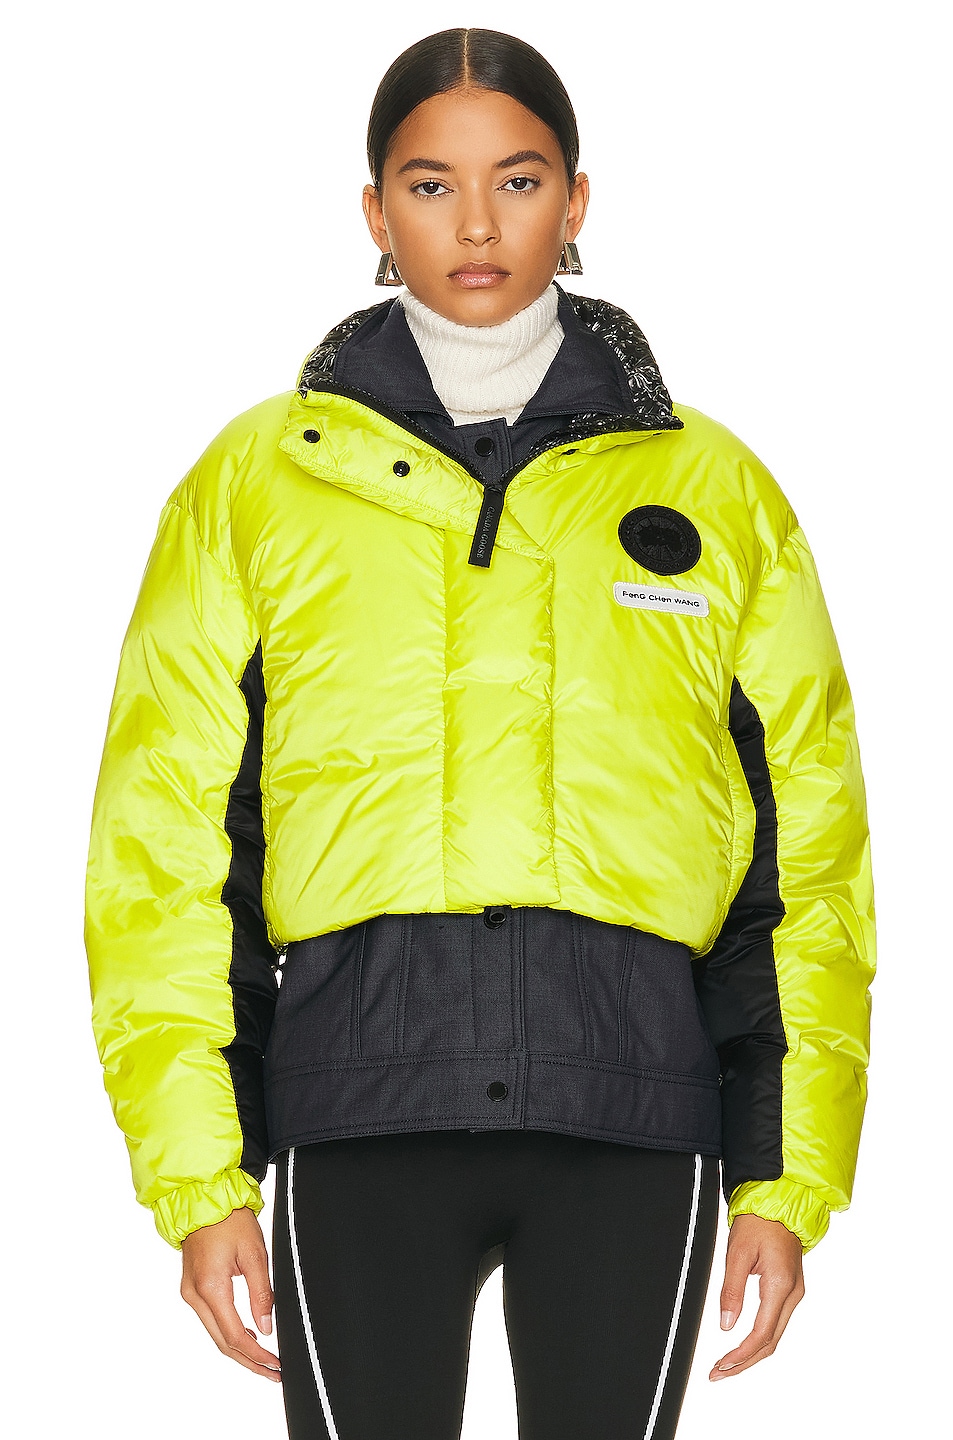 Image 1 of Canada Goose Feng Chen Wang Mercer Down Jacket in Yellow Multi